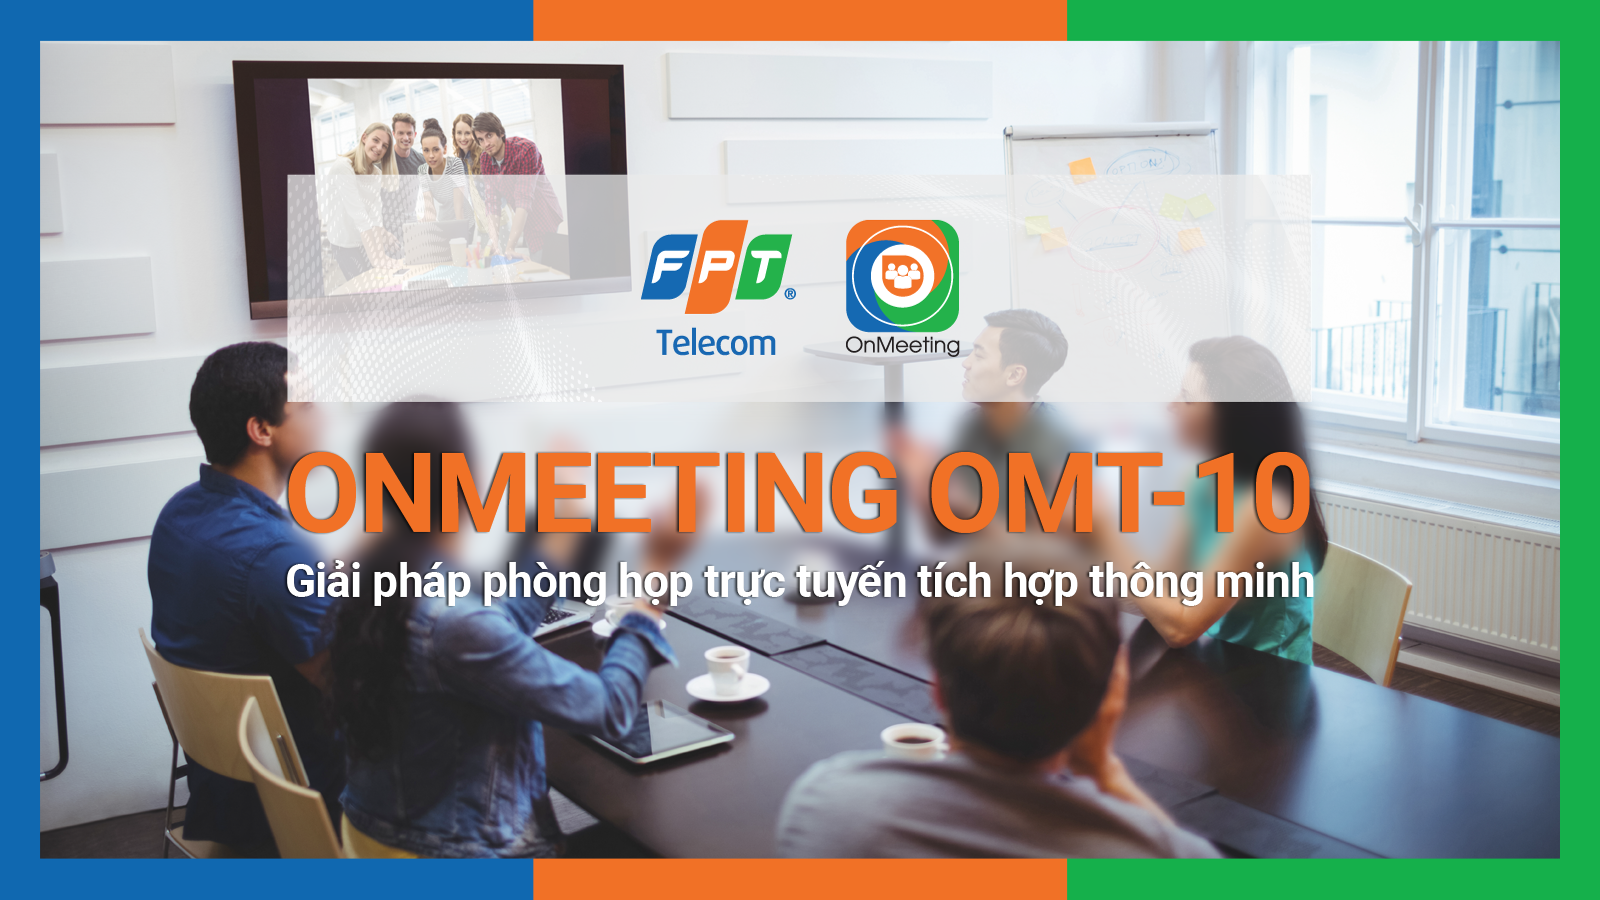 Onmeeting fpt